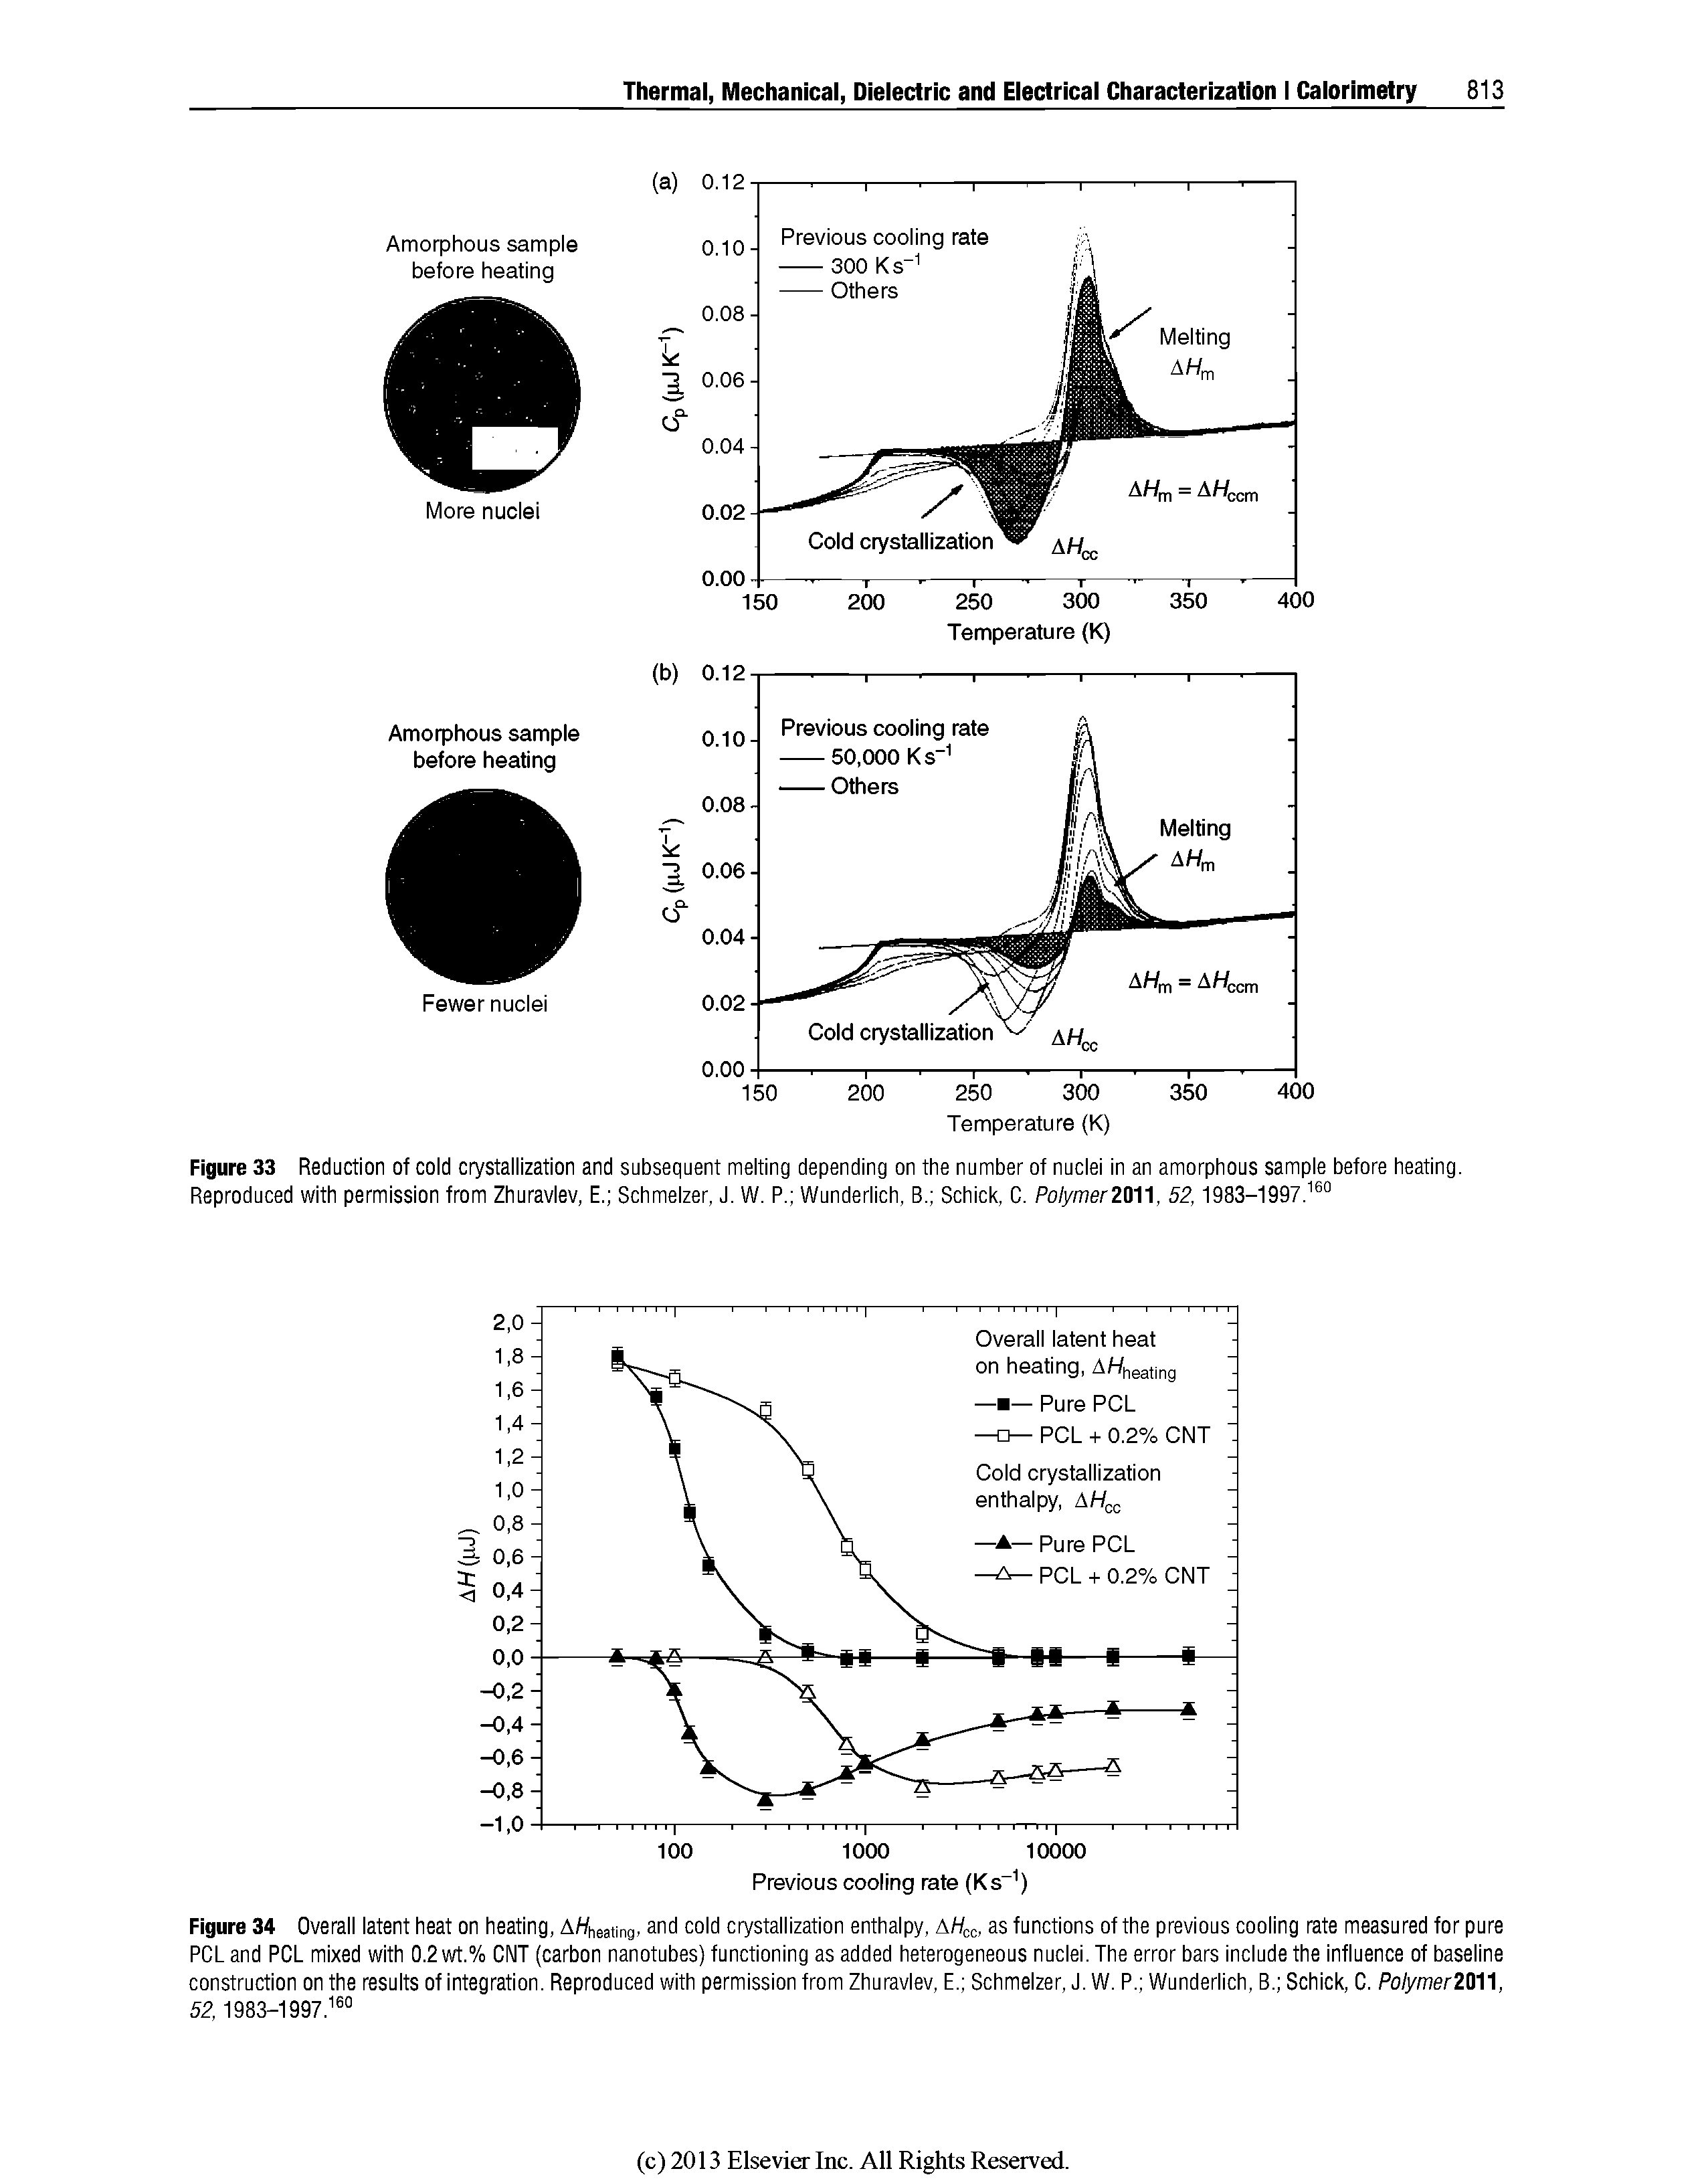 Figure 34 Overall latent heat on heating, AWheaiing, and cold crystallization enthalpy, AWcc. as functions of the previous cooling rate measured for pure PCL and PCL mixed with 0.2 wt.% CNT (carbon nanotubes) functioning as added heterogeneous nuclei. The error bars include the influence of baseline construction on the results of integration. Reproduced with permission from Zhuravlev, E. Schmelzer, J. W. P. Wunderlich, B. Schick, C. Po/ymer2011, 52,1983-1997. ...